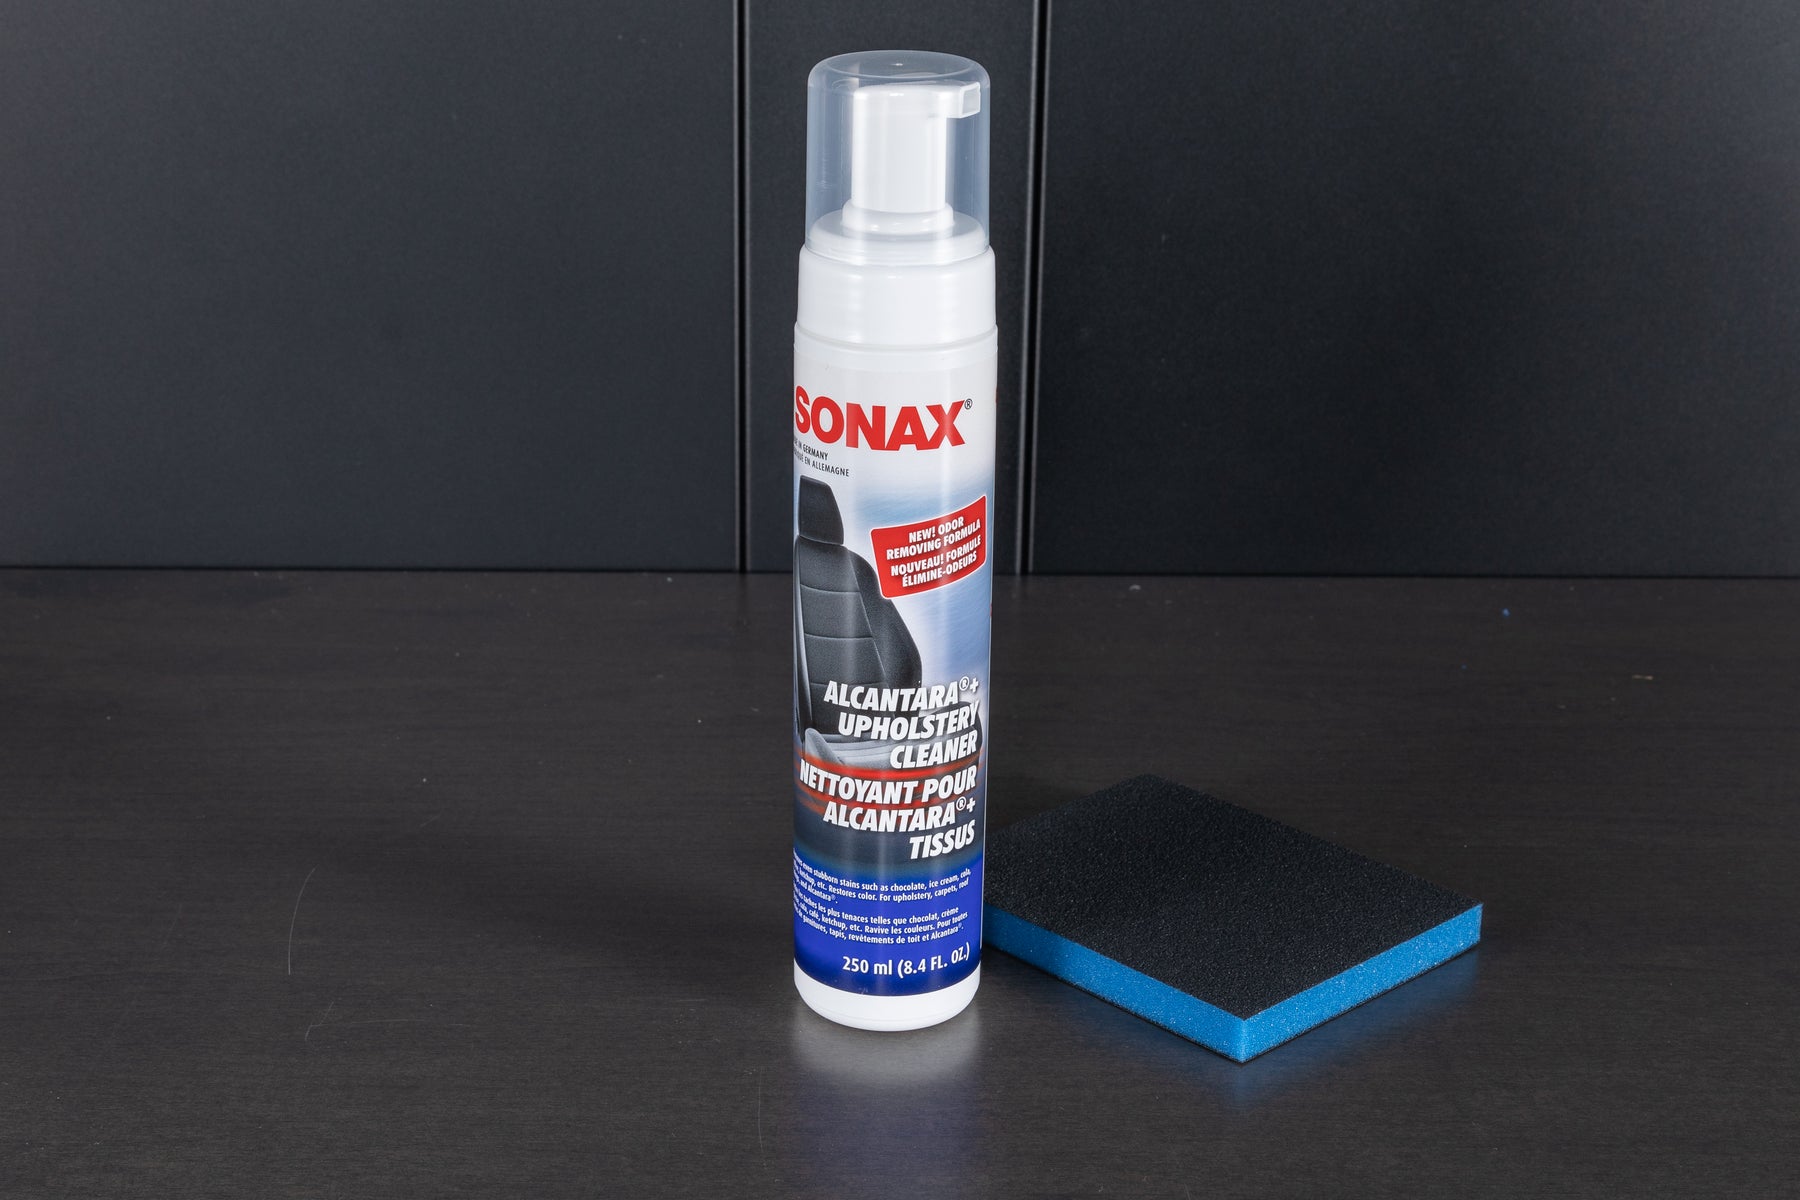 Sonax Xtreme Upholstery and Alcantara Cleaner 0206 3000-544 400mL